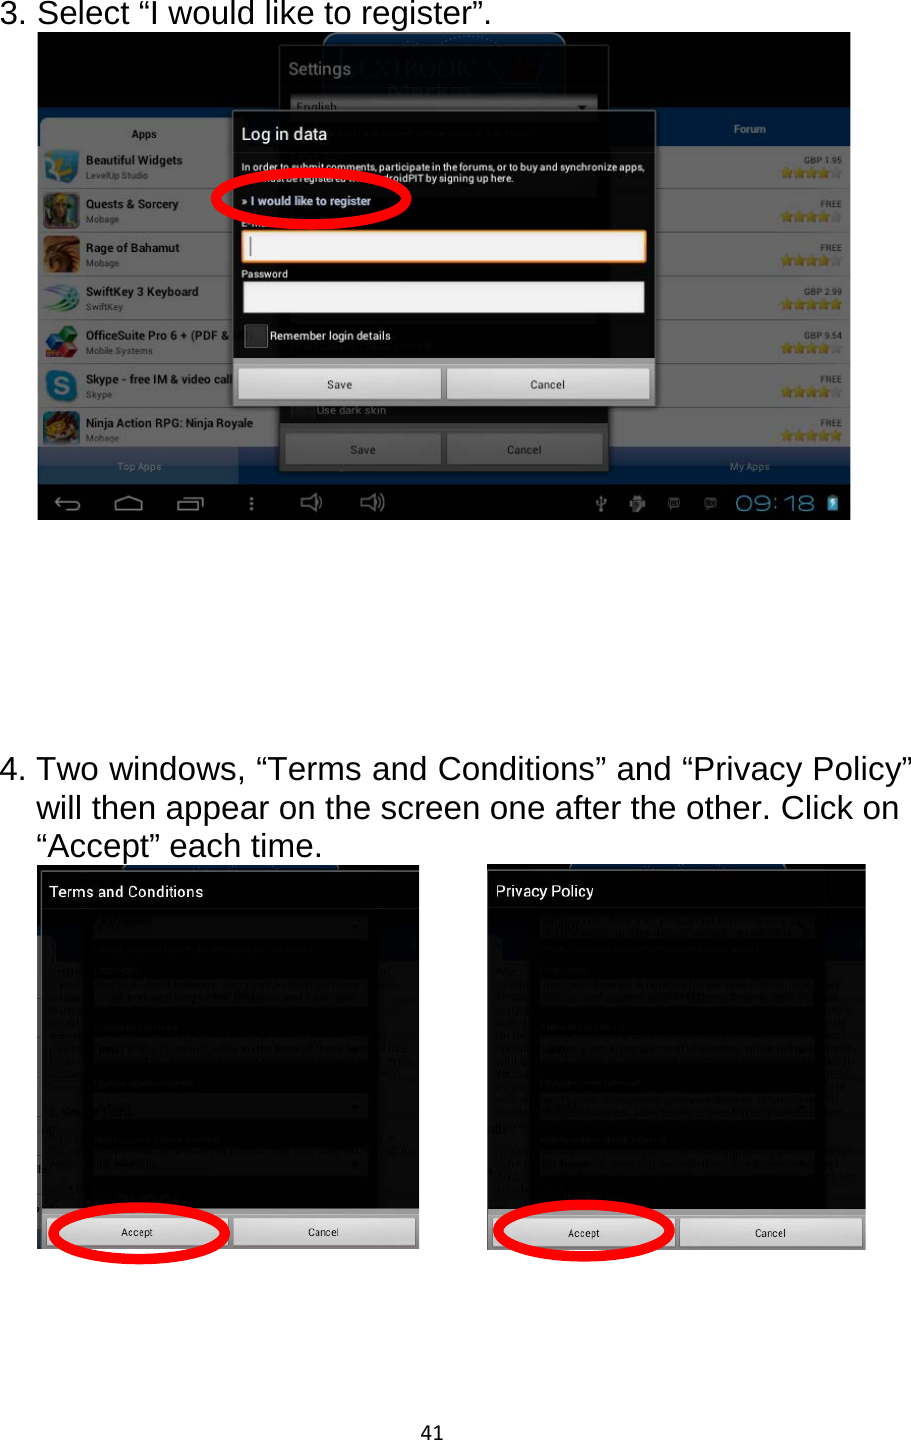 41  3. Select “I would like to register”.          4. Two windows, “Terms and Conditions” and “Privacy Policy” will then appear on the screen one after the other. Click on “Accept” each time.      